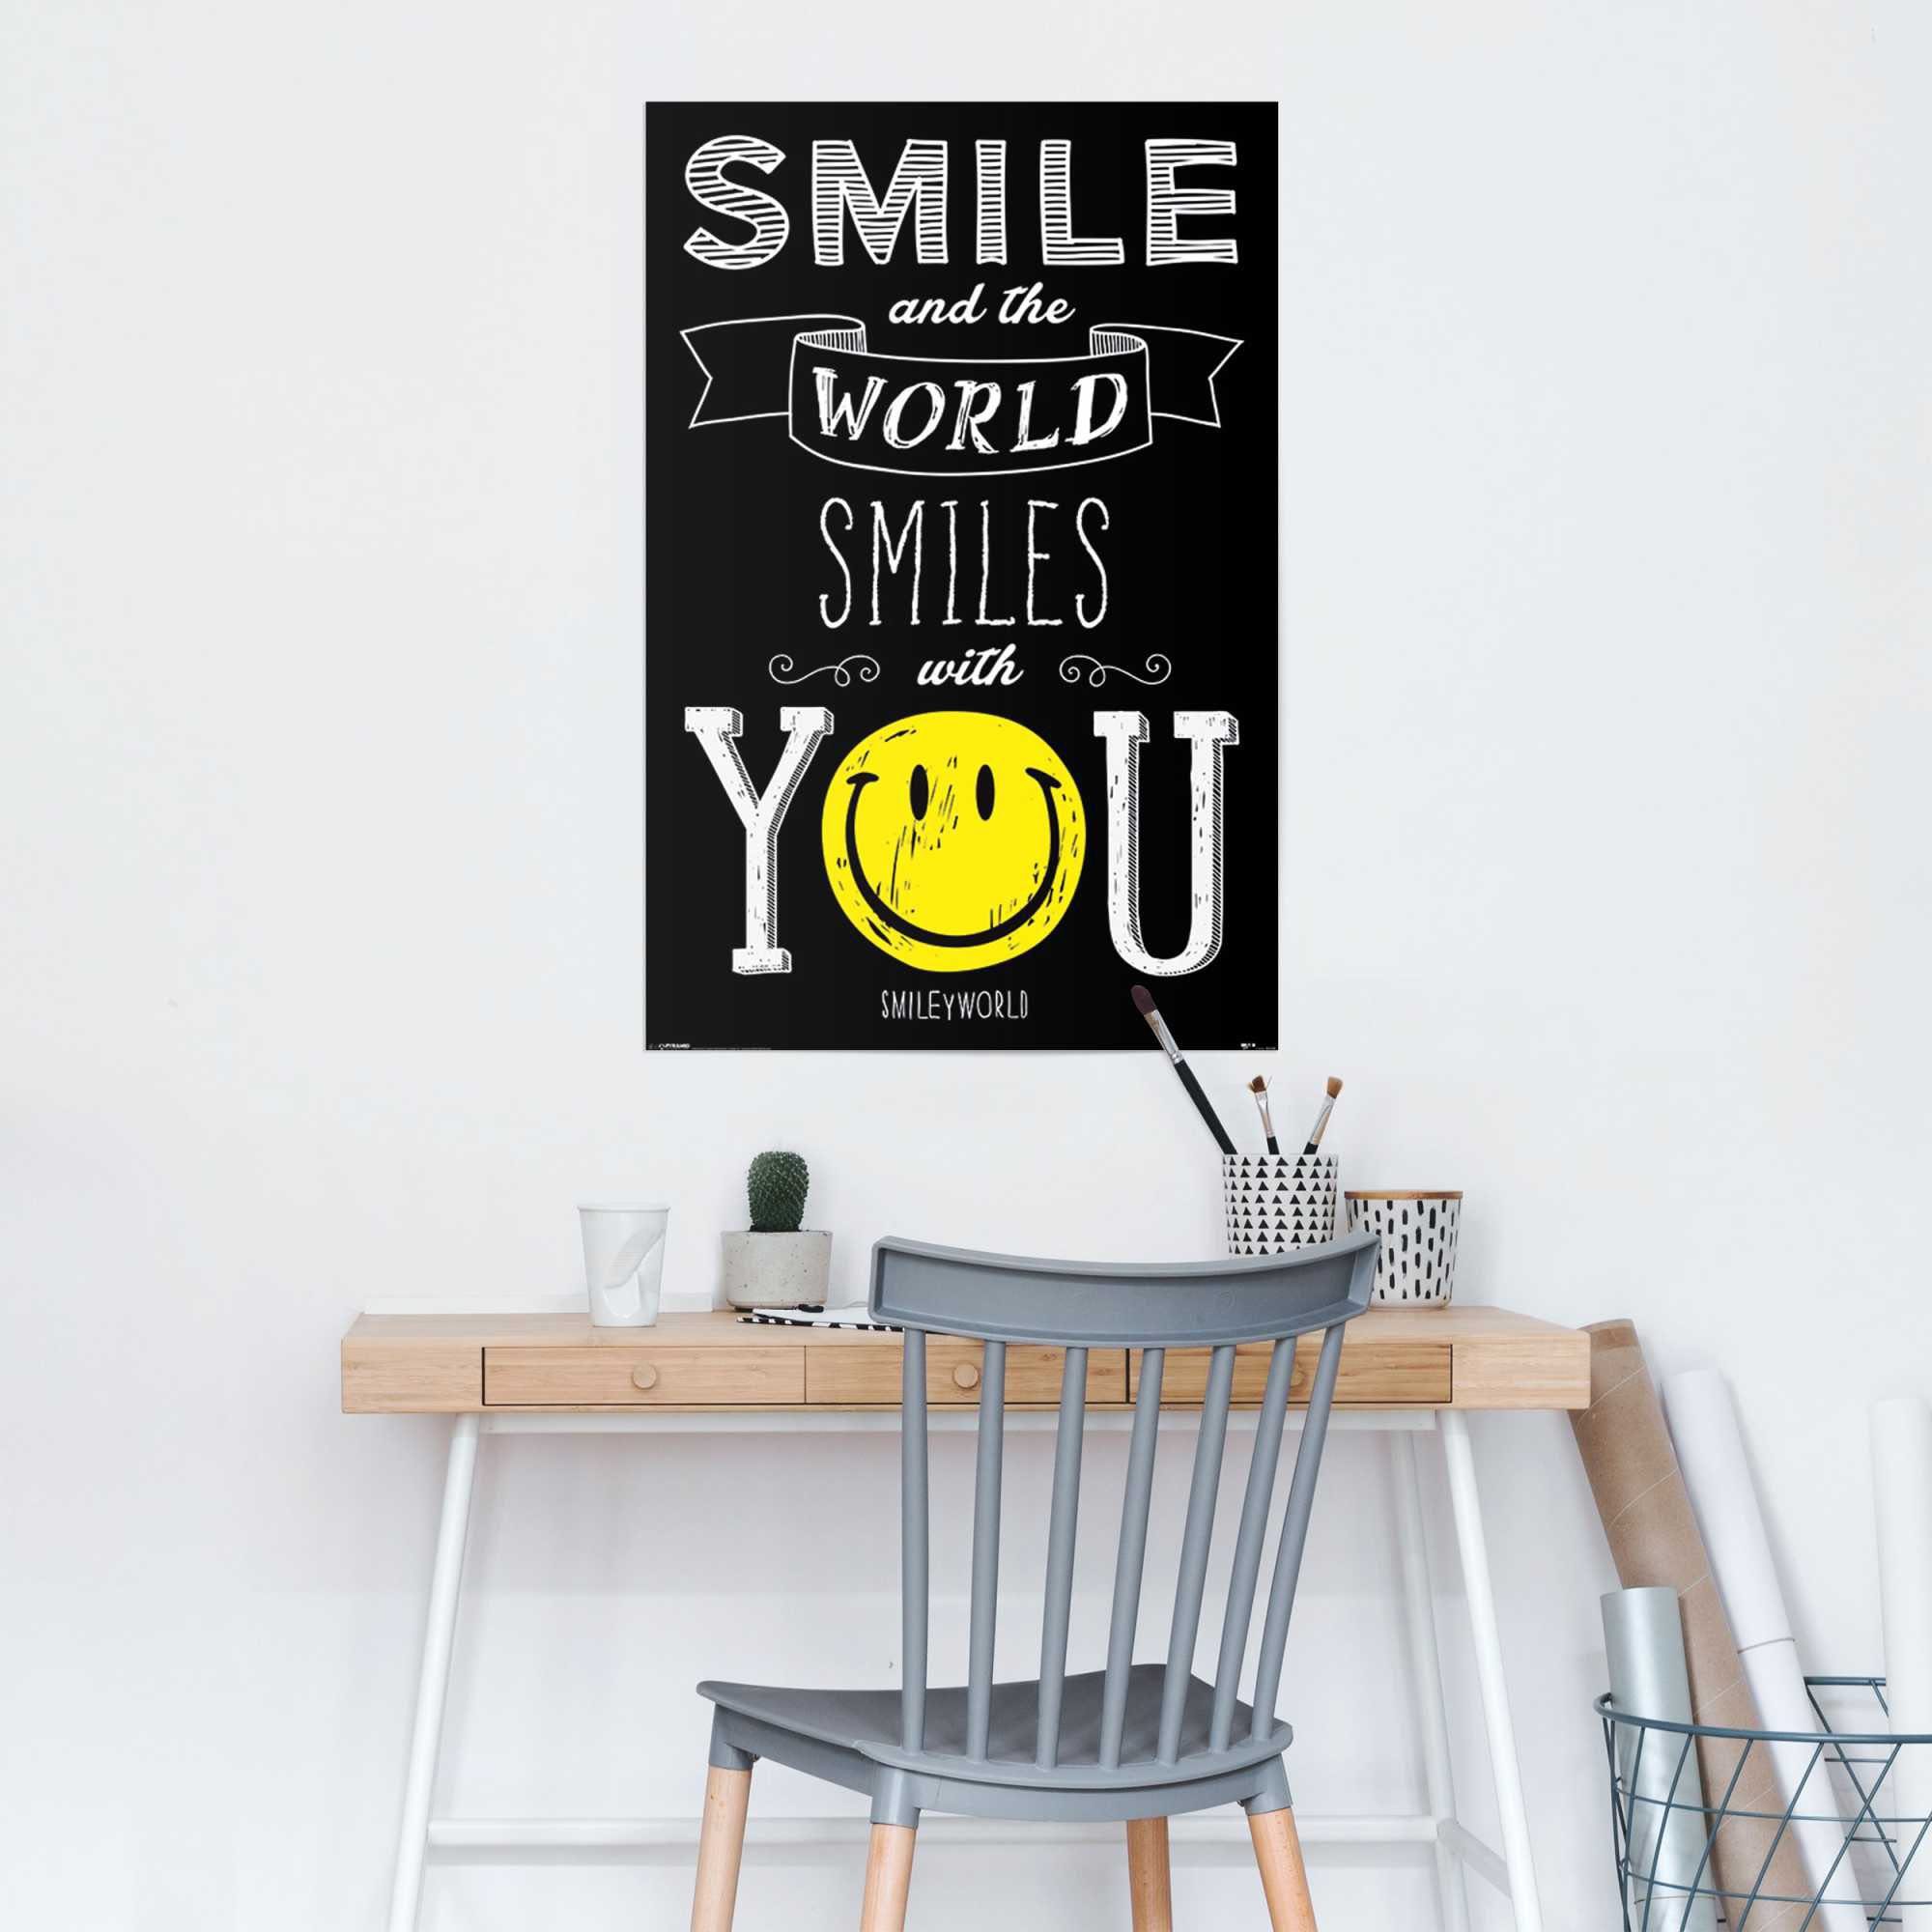 Poster smiles Smiley world Reinders! St) with you, (1